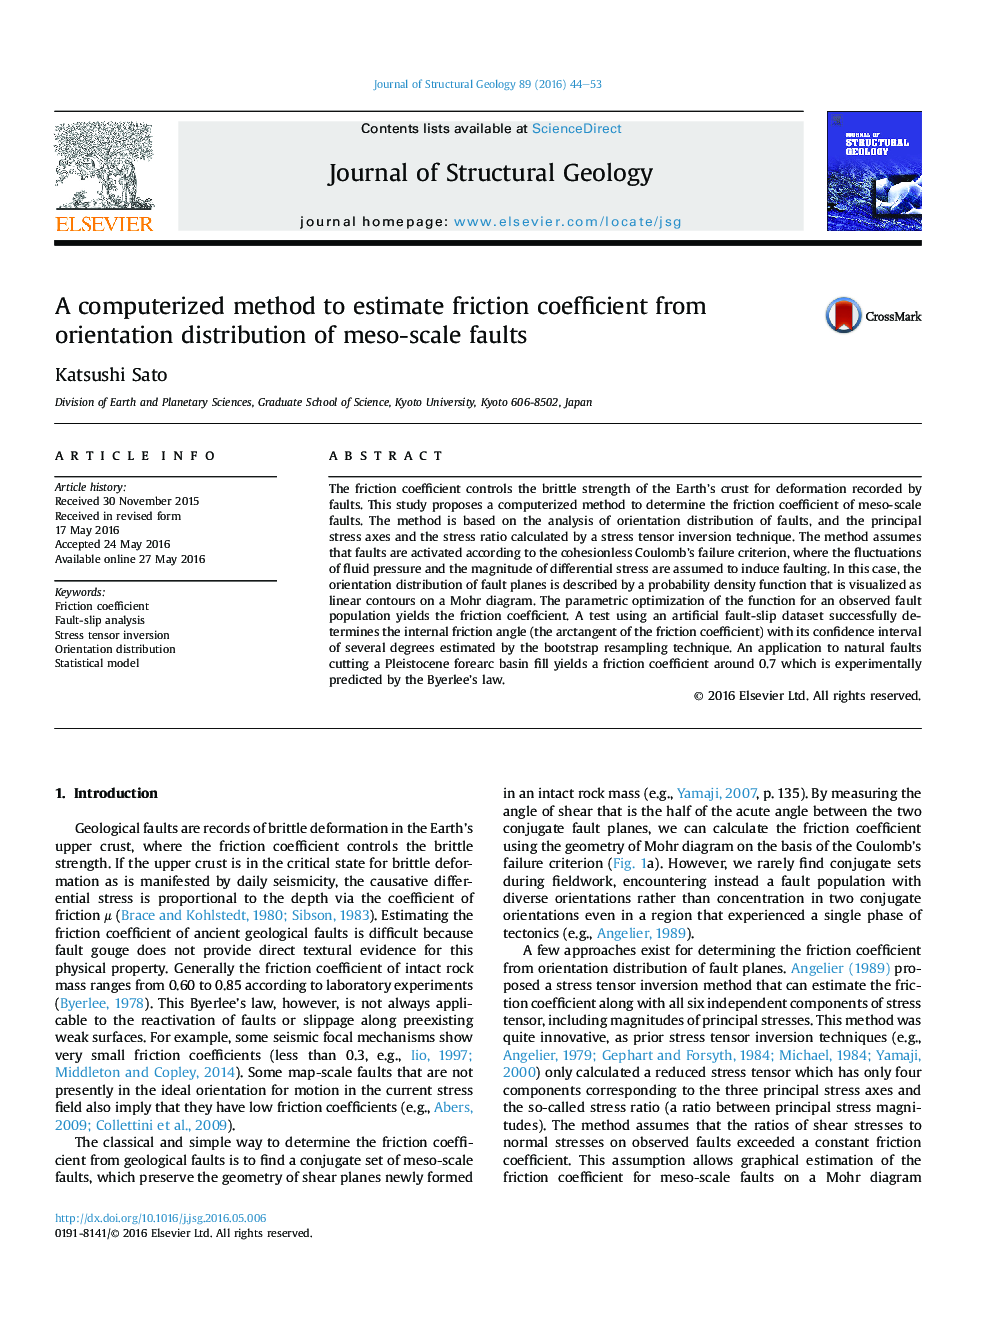 A computerized method to estimate friction coefficient from orientation distribution of meso-scale faults